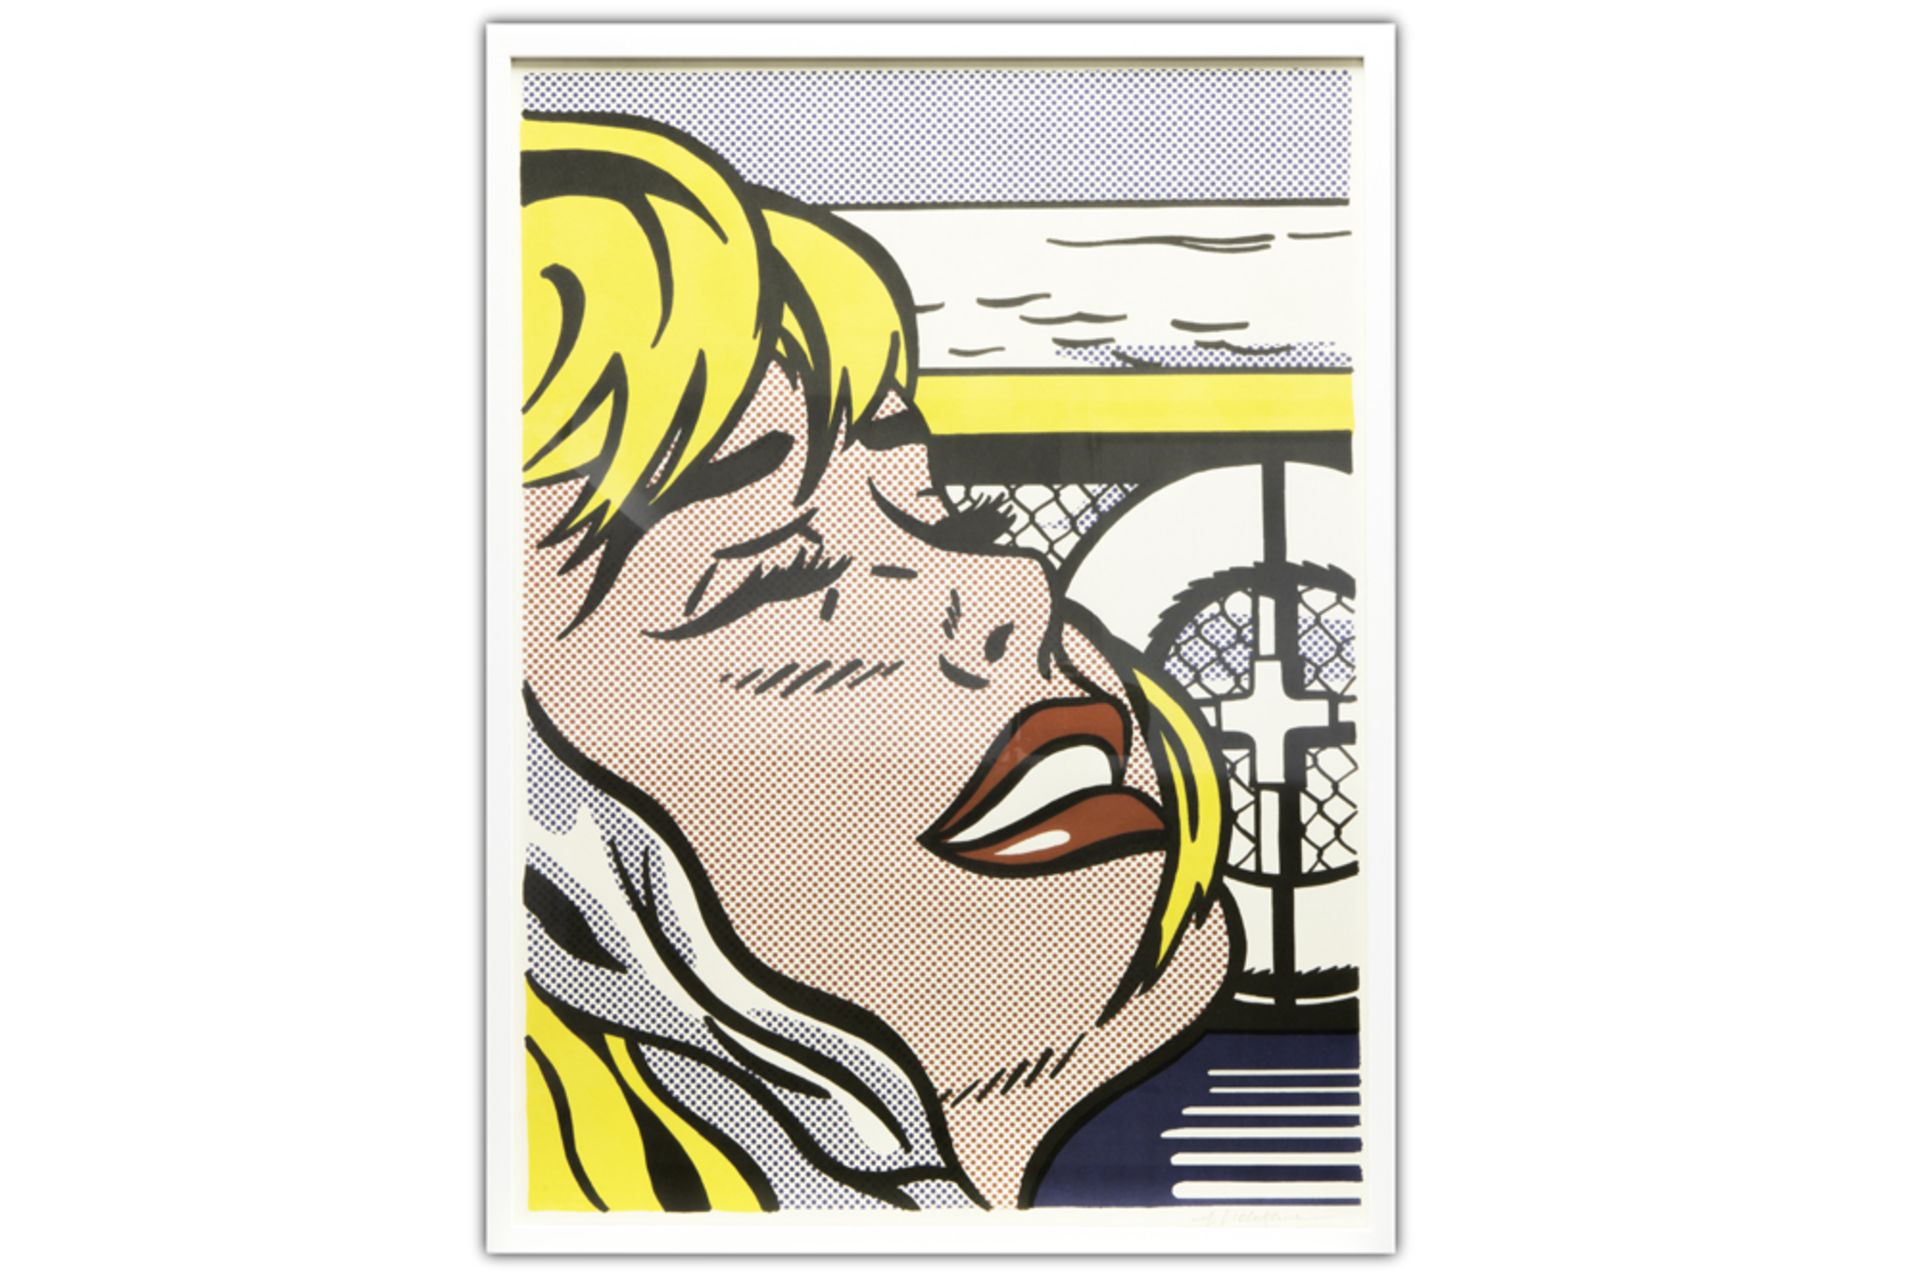 Roy Lichtenstein early edition "Shipboard Girl" print in colors on fine white paper - signed || - Image 4 of 4